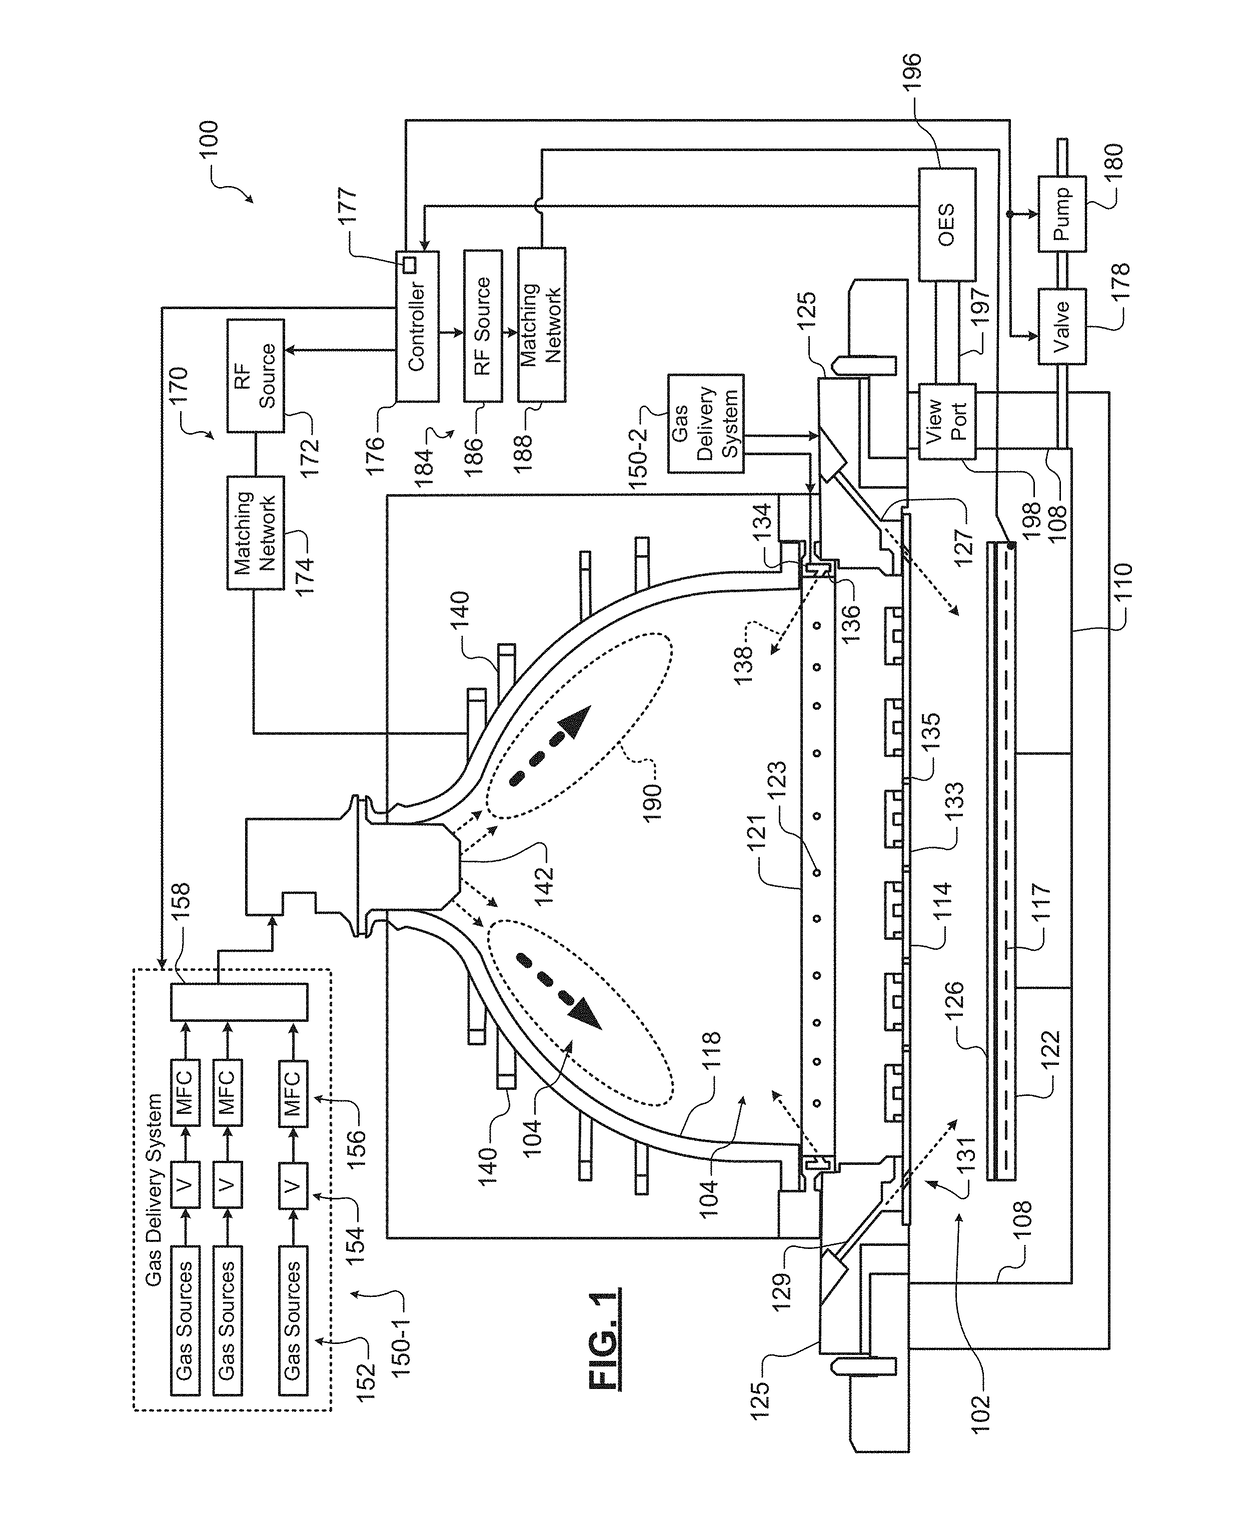 Systems and methods for detecting oxygen in-situ in a substrate area of a substrate processing system